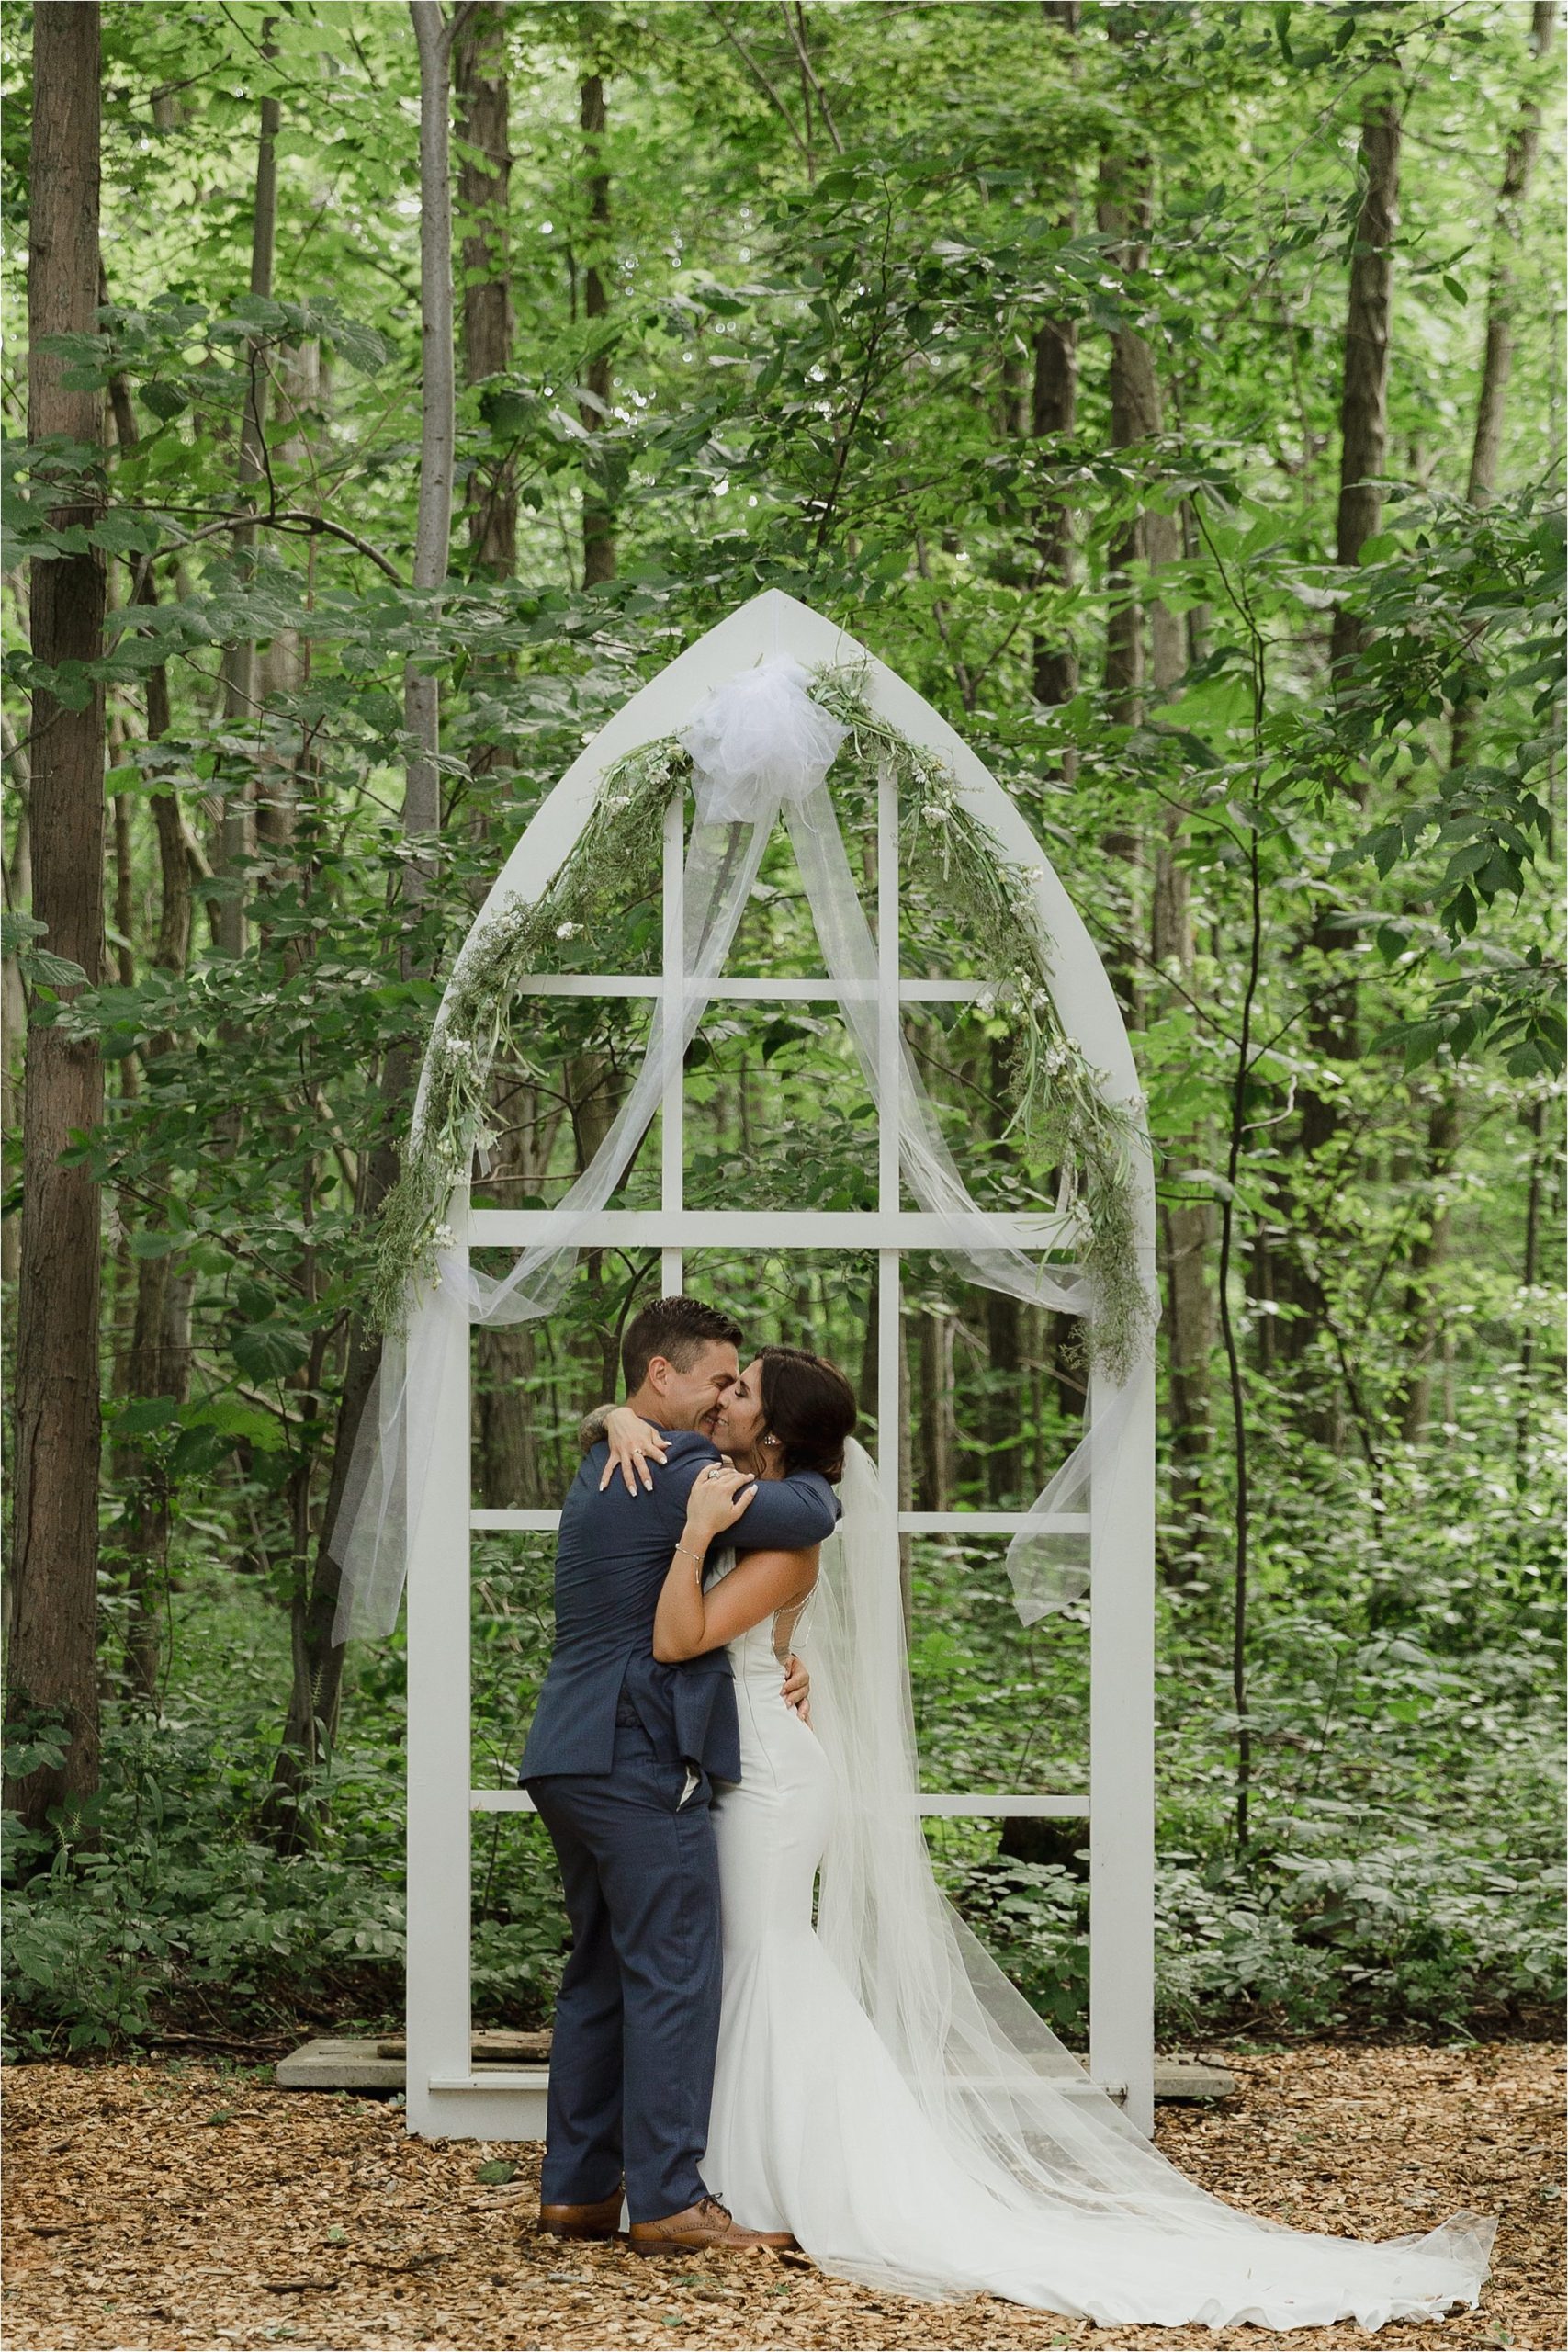 The Clearing ceremony wedding venue bride and groom first kiss in front of arbor